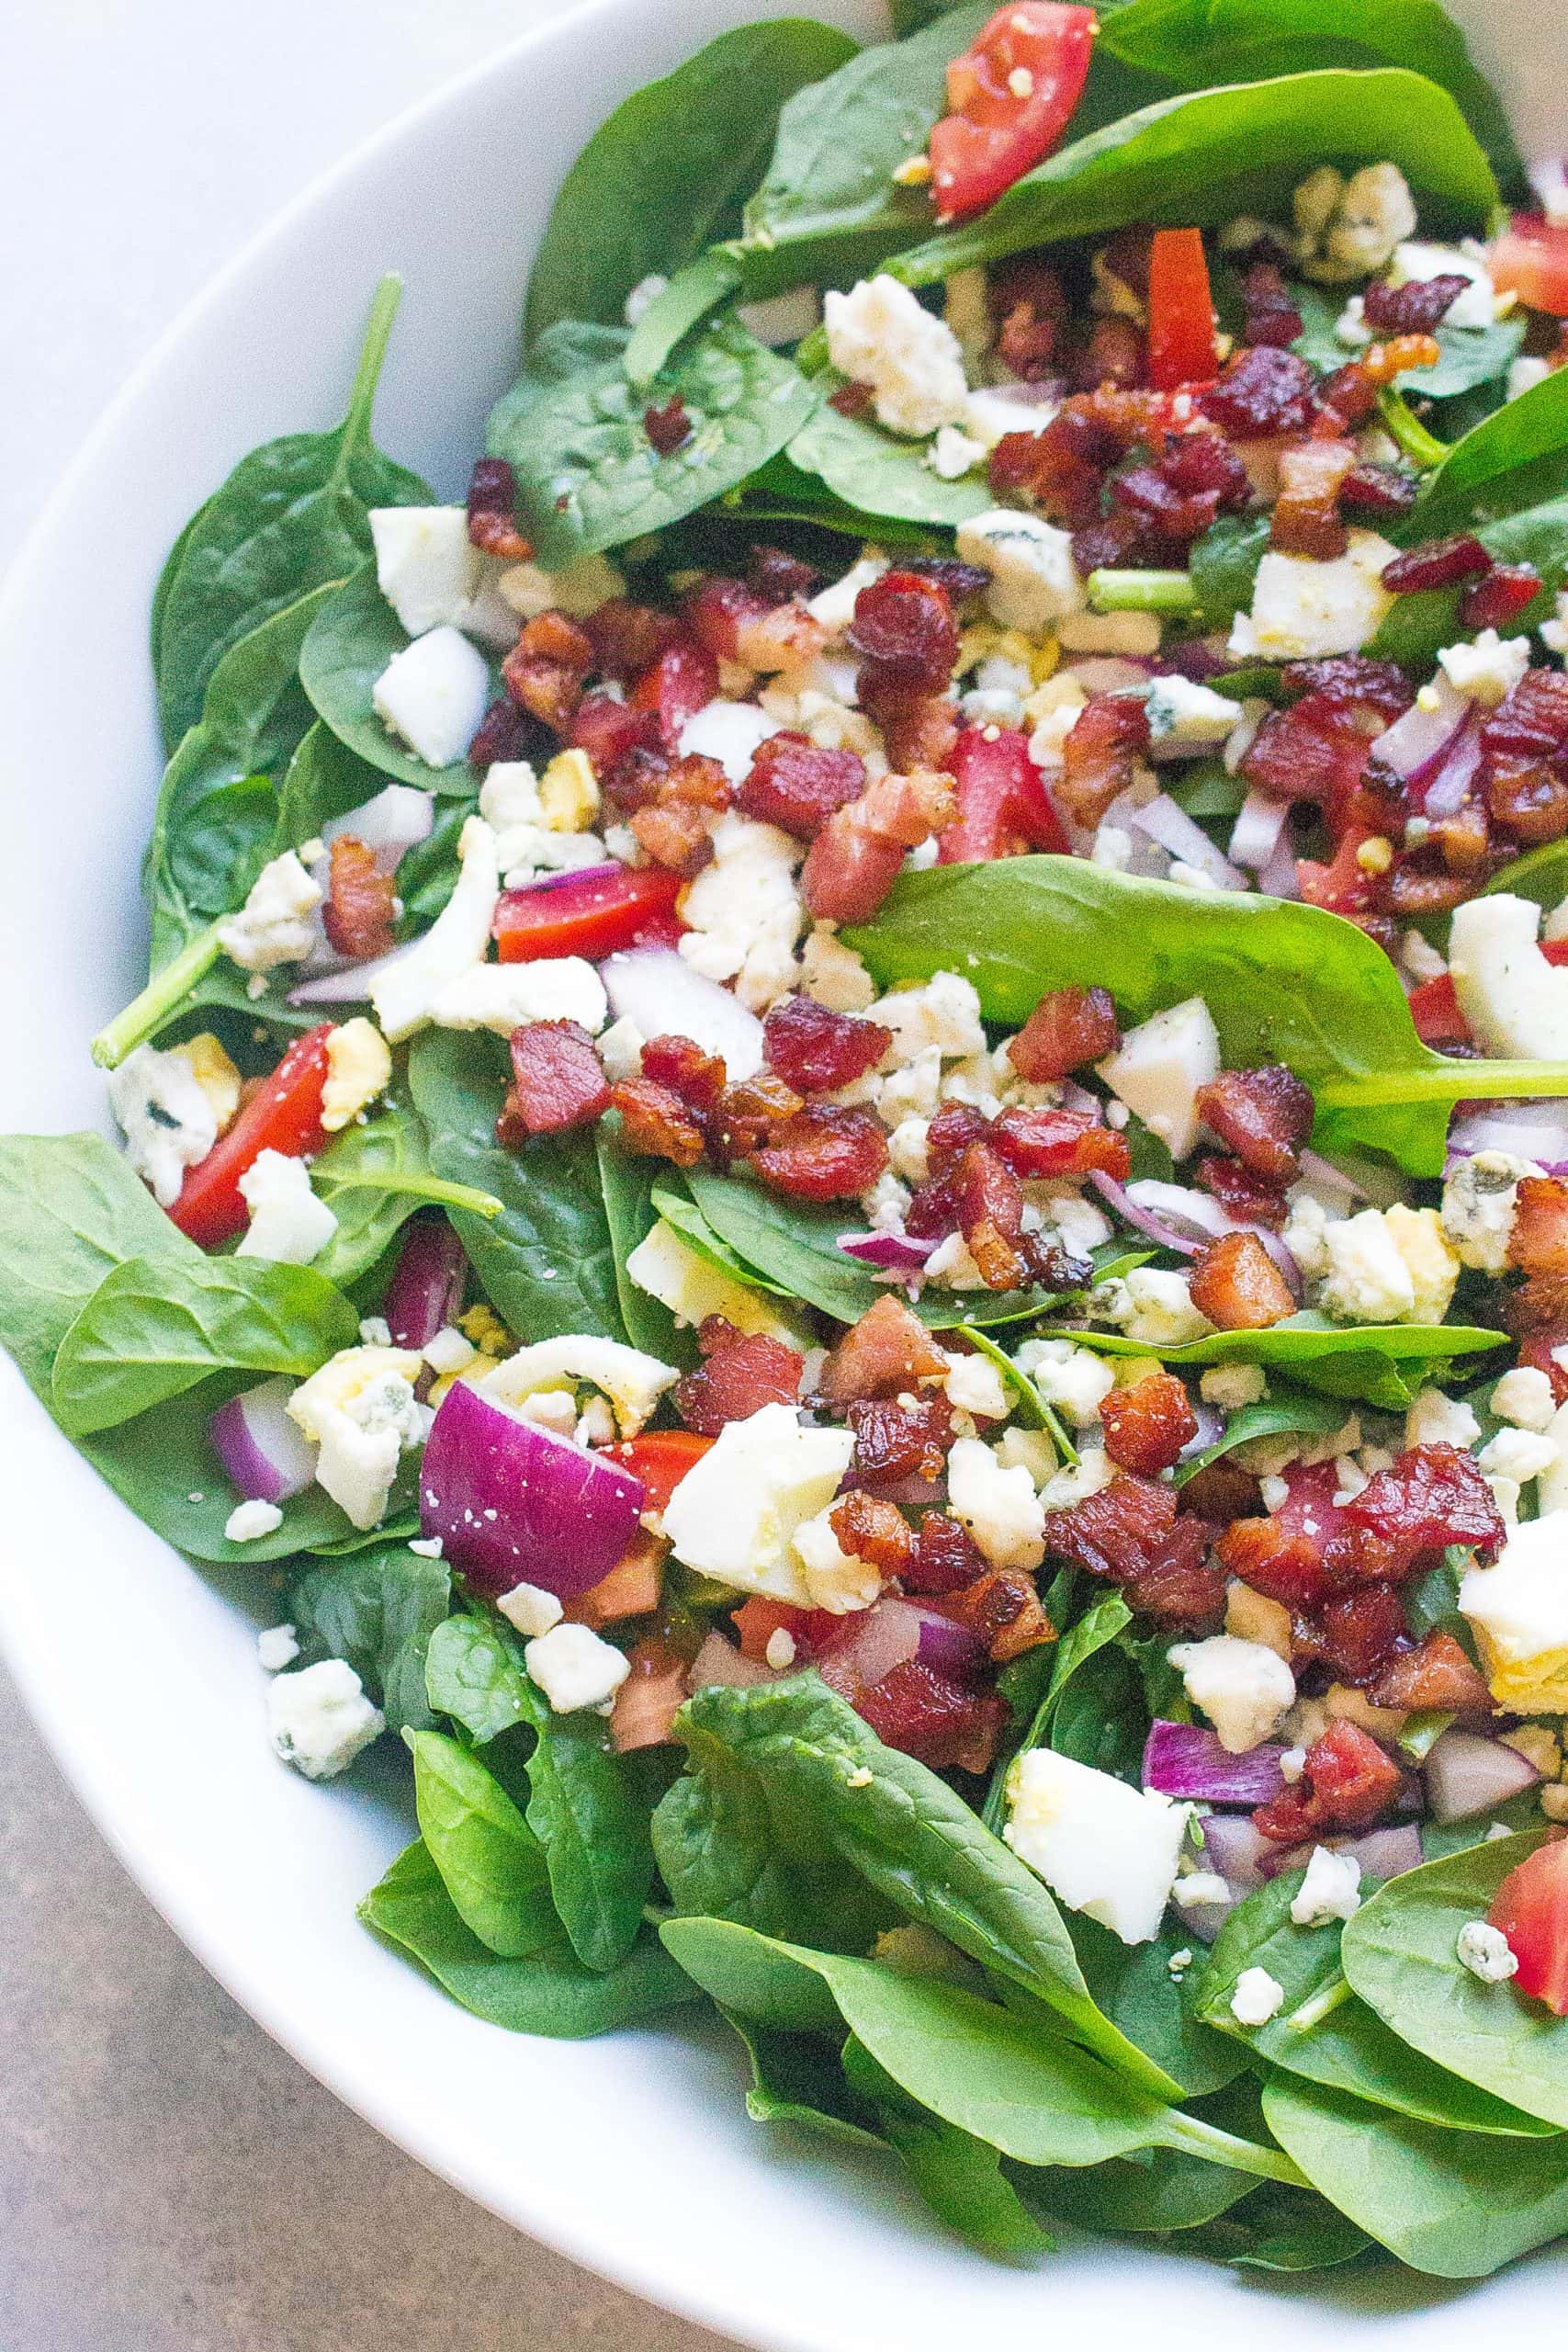 Bacon Salad with spinach